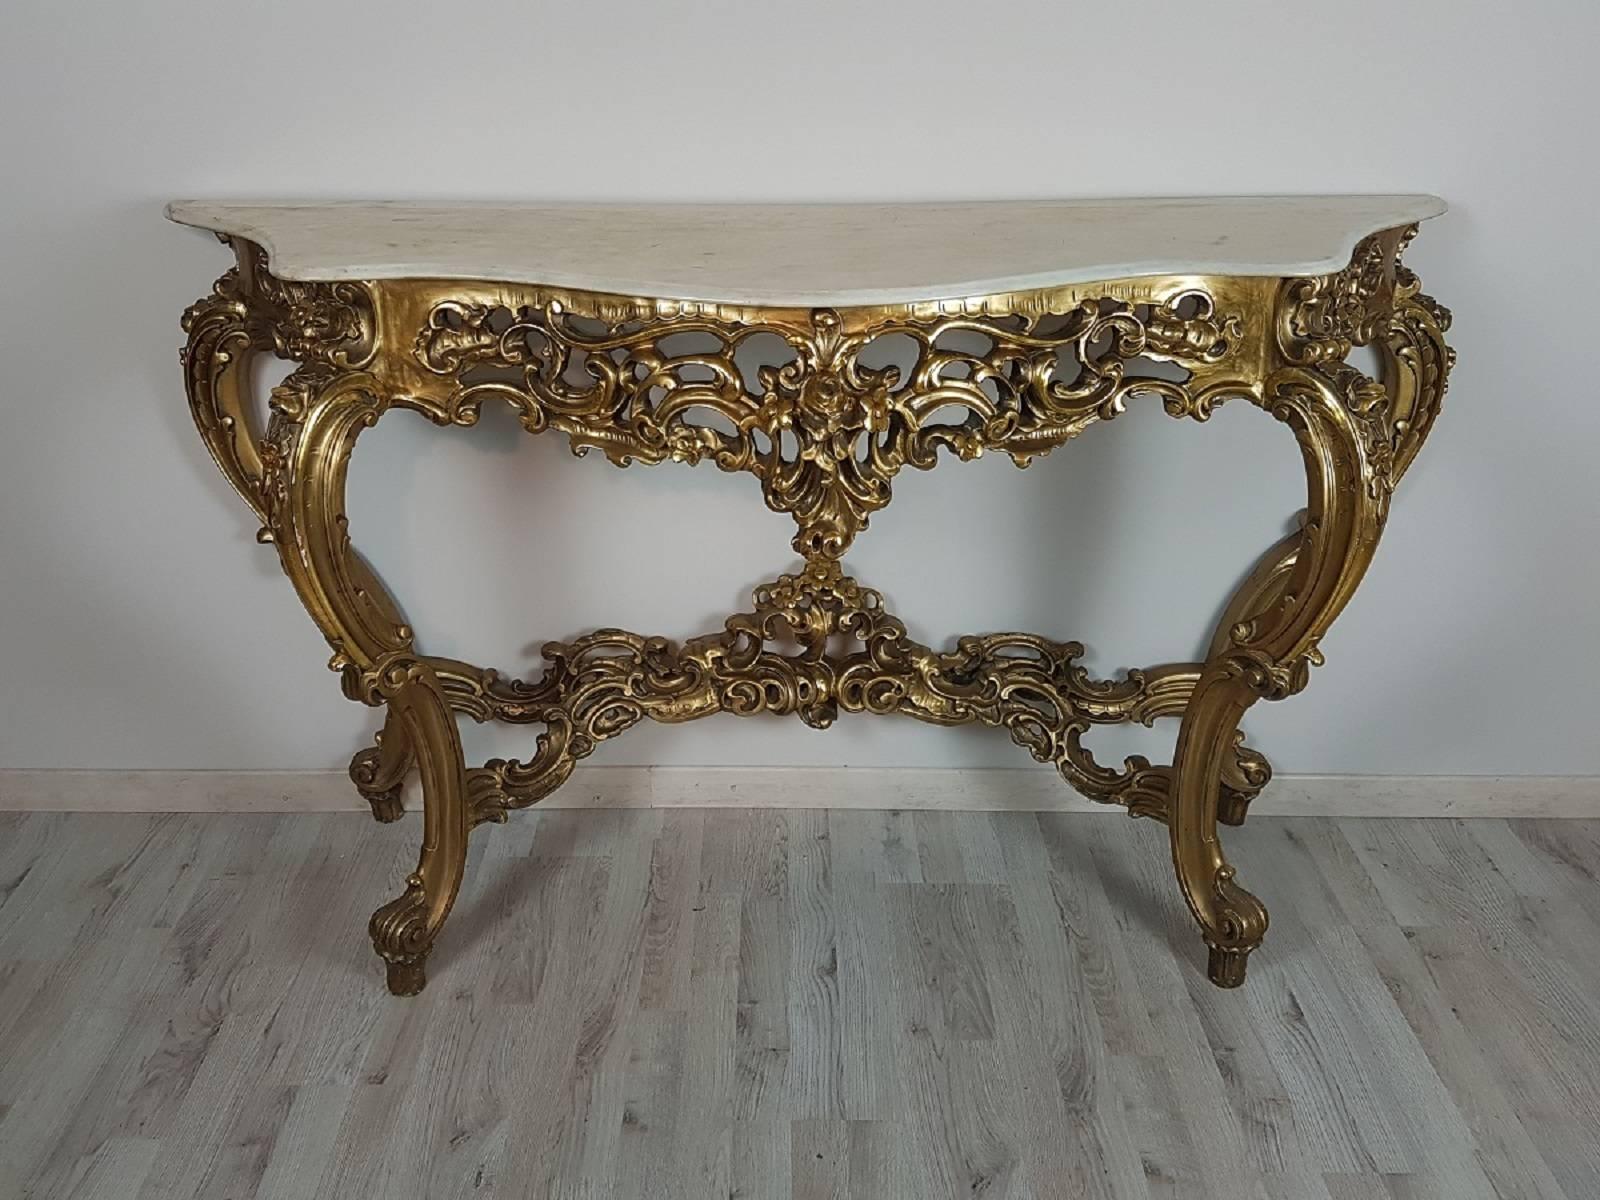 Very important beautiful rich and unobtainable console table with richly carved in perfect style Italian Baroque.
The console table was built in the early 1900s beautiful workmanship in gold and marble
The console comes in fact from a noble